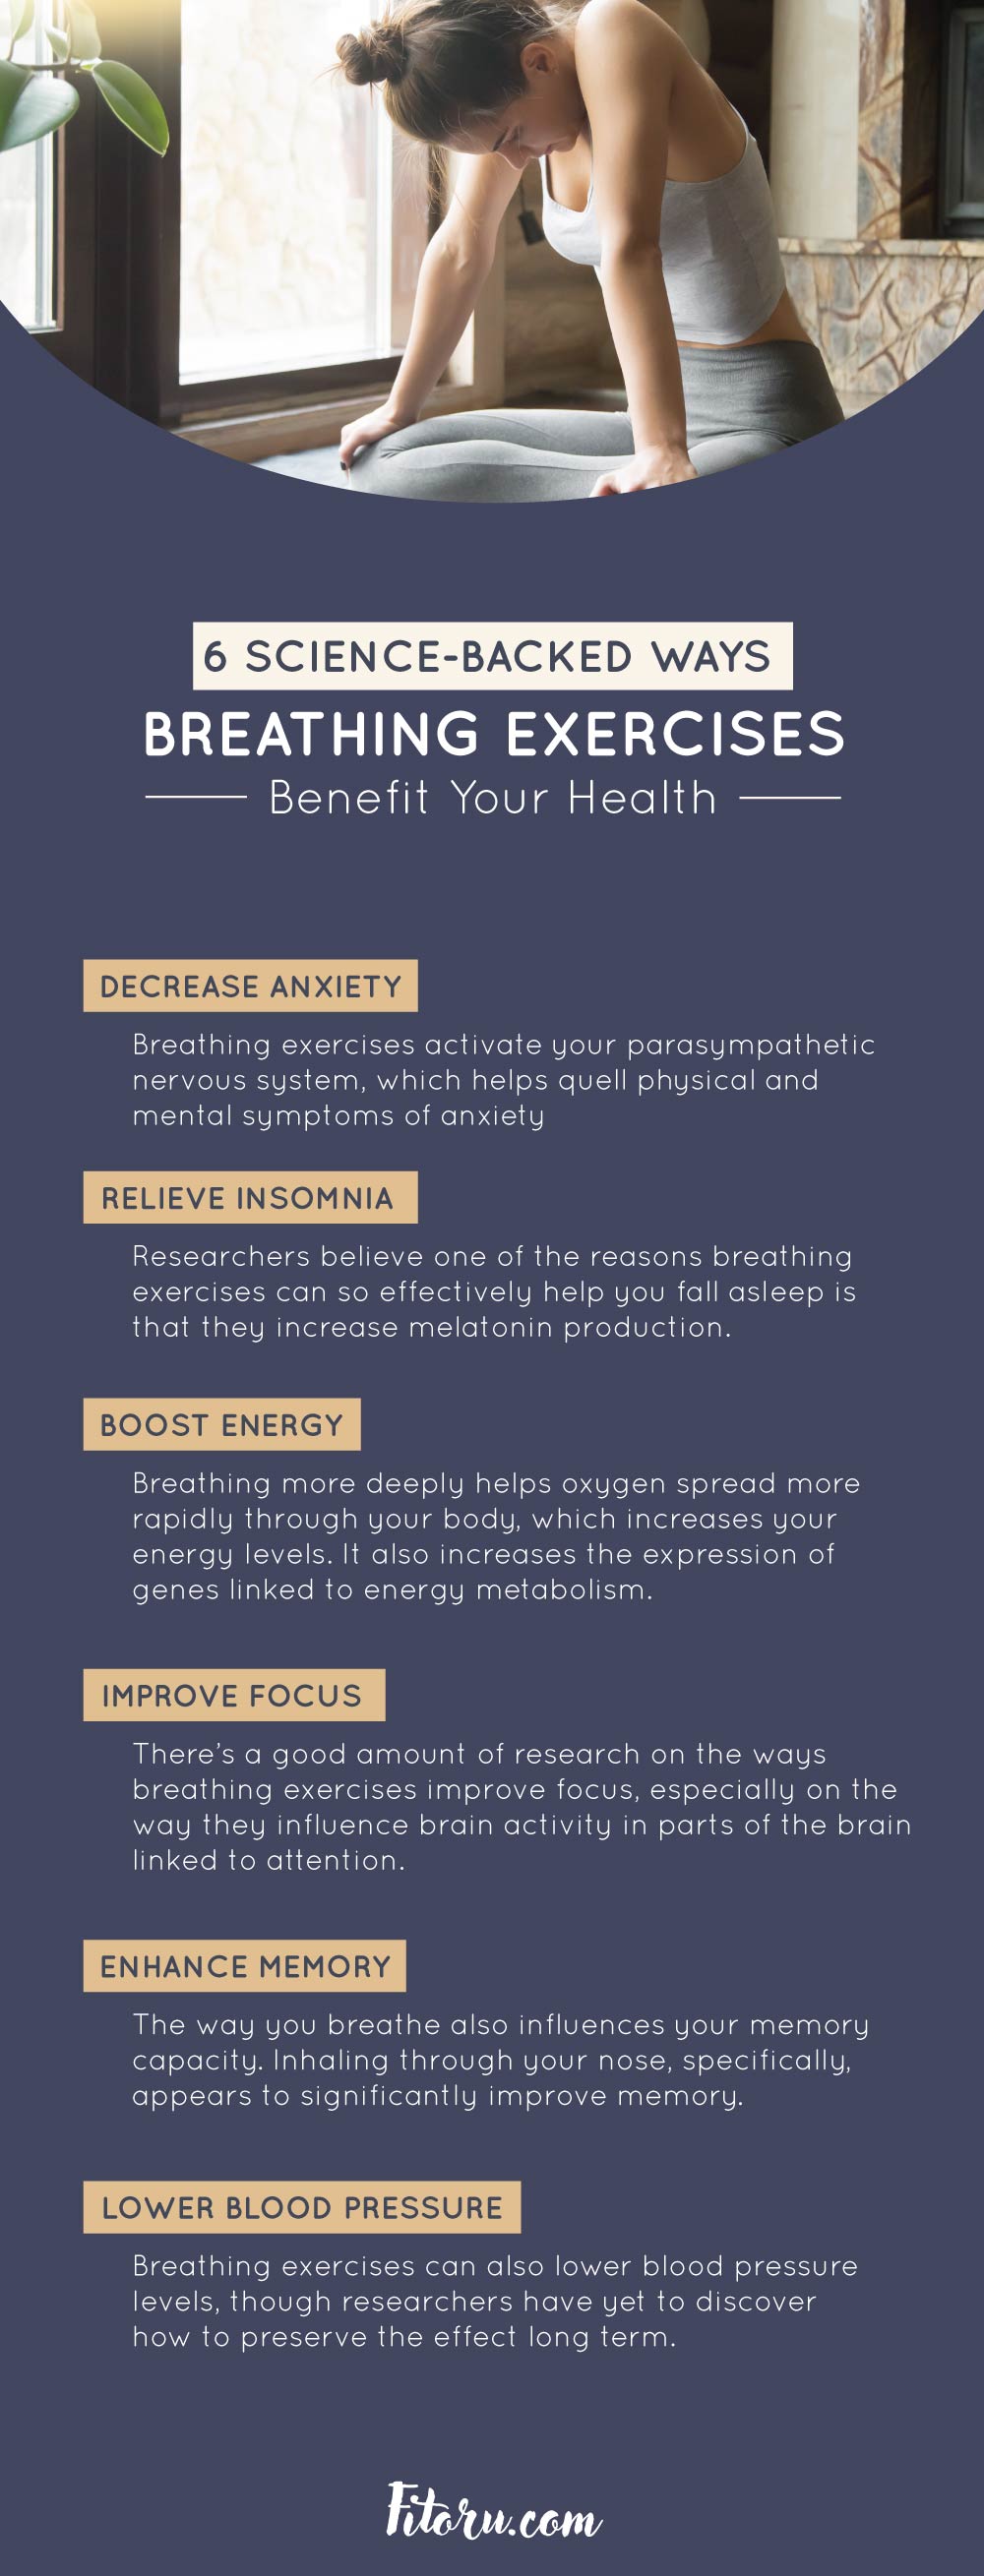 6 Science-Backed Ways Breathing Exercises Benefit Your Health